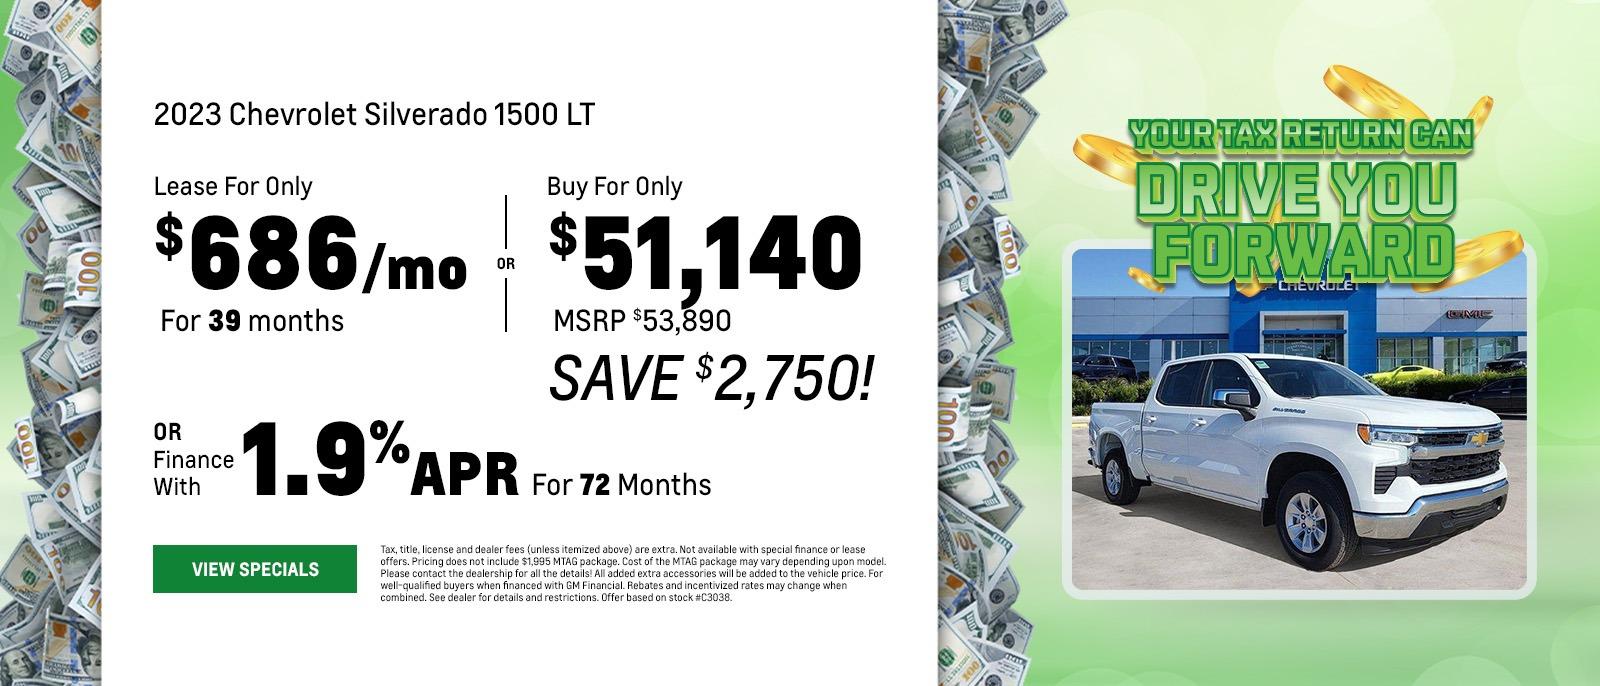 2023 Chevrolet Silverado 1500 LT Lease For Only $686/mo For 39 months OR Buy For Only $51,140 MSRP $53,890 SAVE $2,750! OR Finance With 1.9% APR For 72 Months